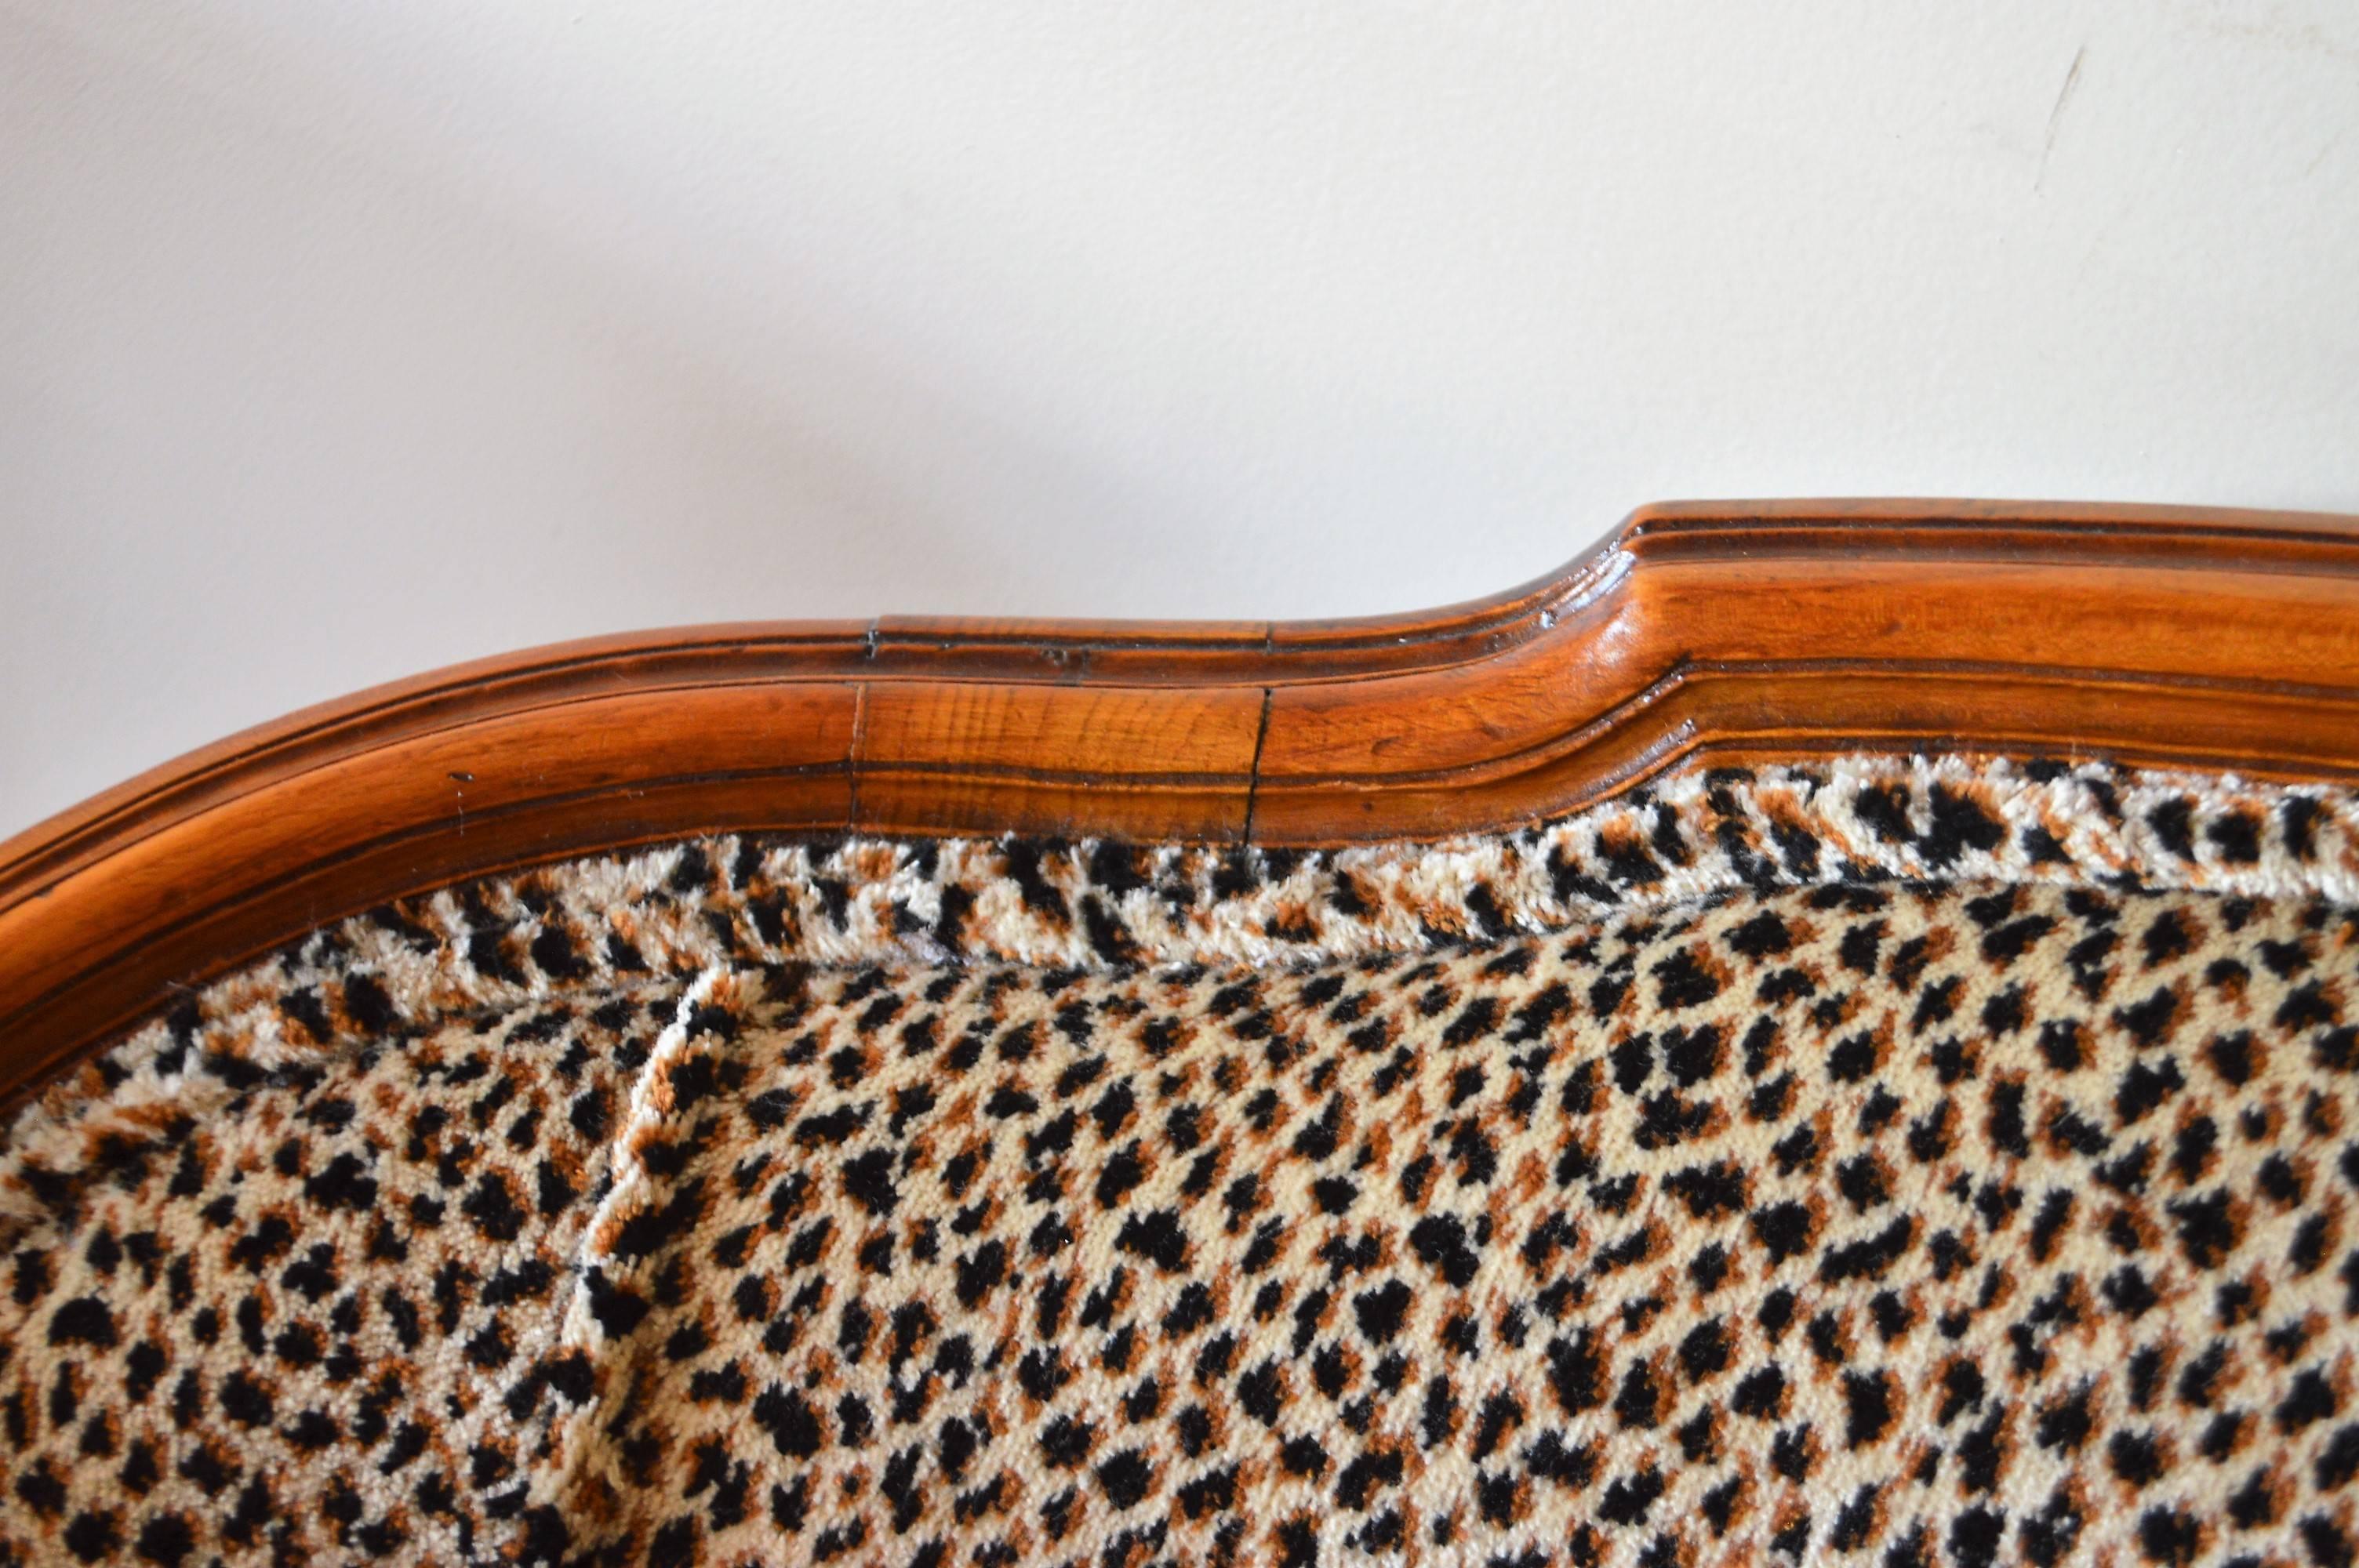 20th Century Louis XVI Style Walnut Sofa Newly Upholstered in a Leopard Pattern Chenille